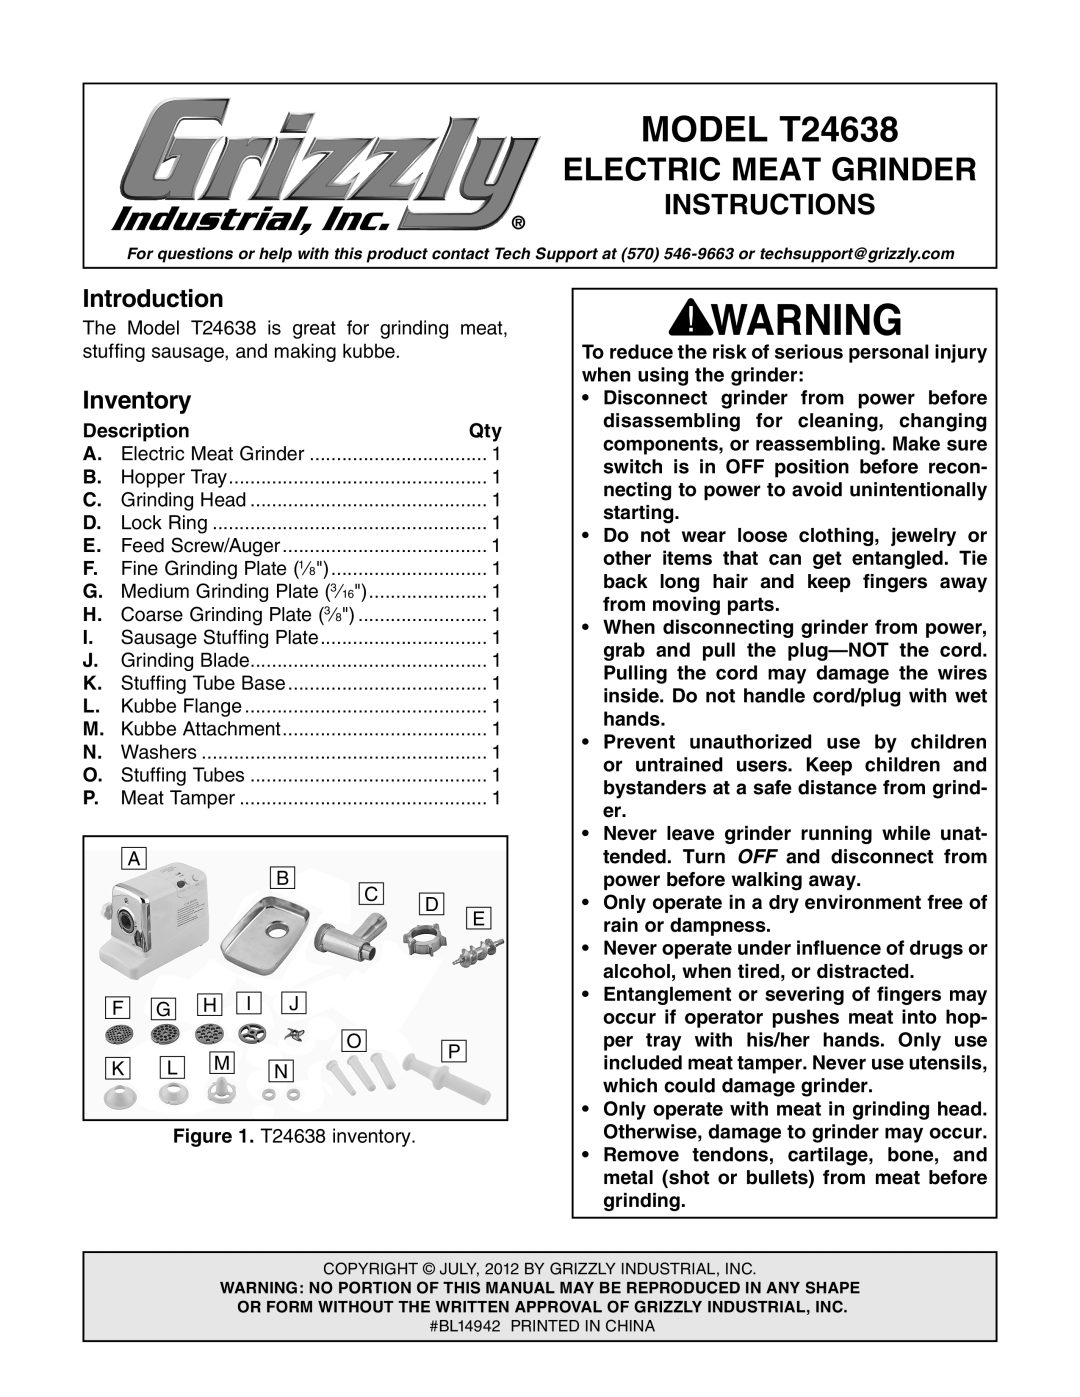 Grizzly manual Introduction, Inventory, MODEL T24638, Electric Meat Grinder, Instructions 